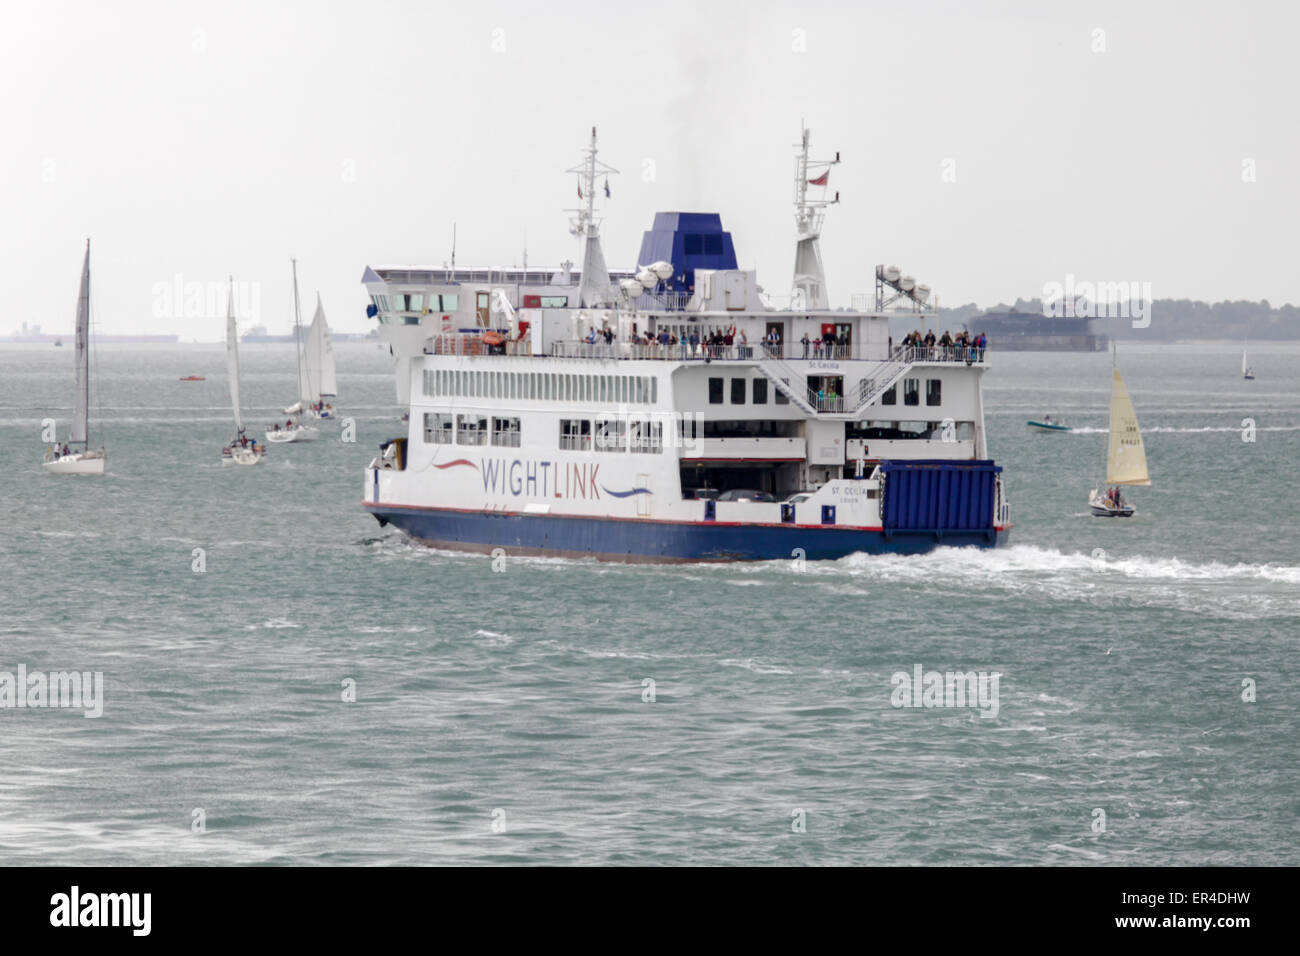 The Wightlink Isle of Wight Car Ferry 'St. Cecilia' leaving Portsmouth on its way to Fishbourne on the Isle of Wight. Stock Photo